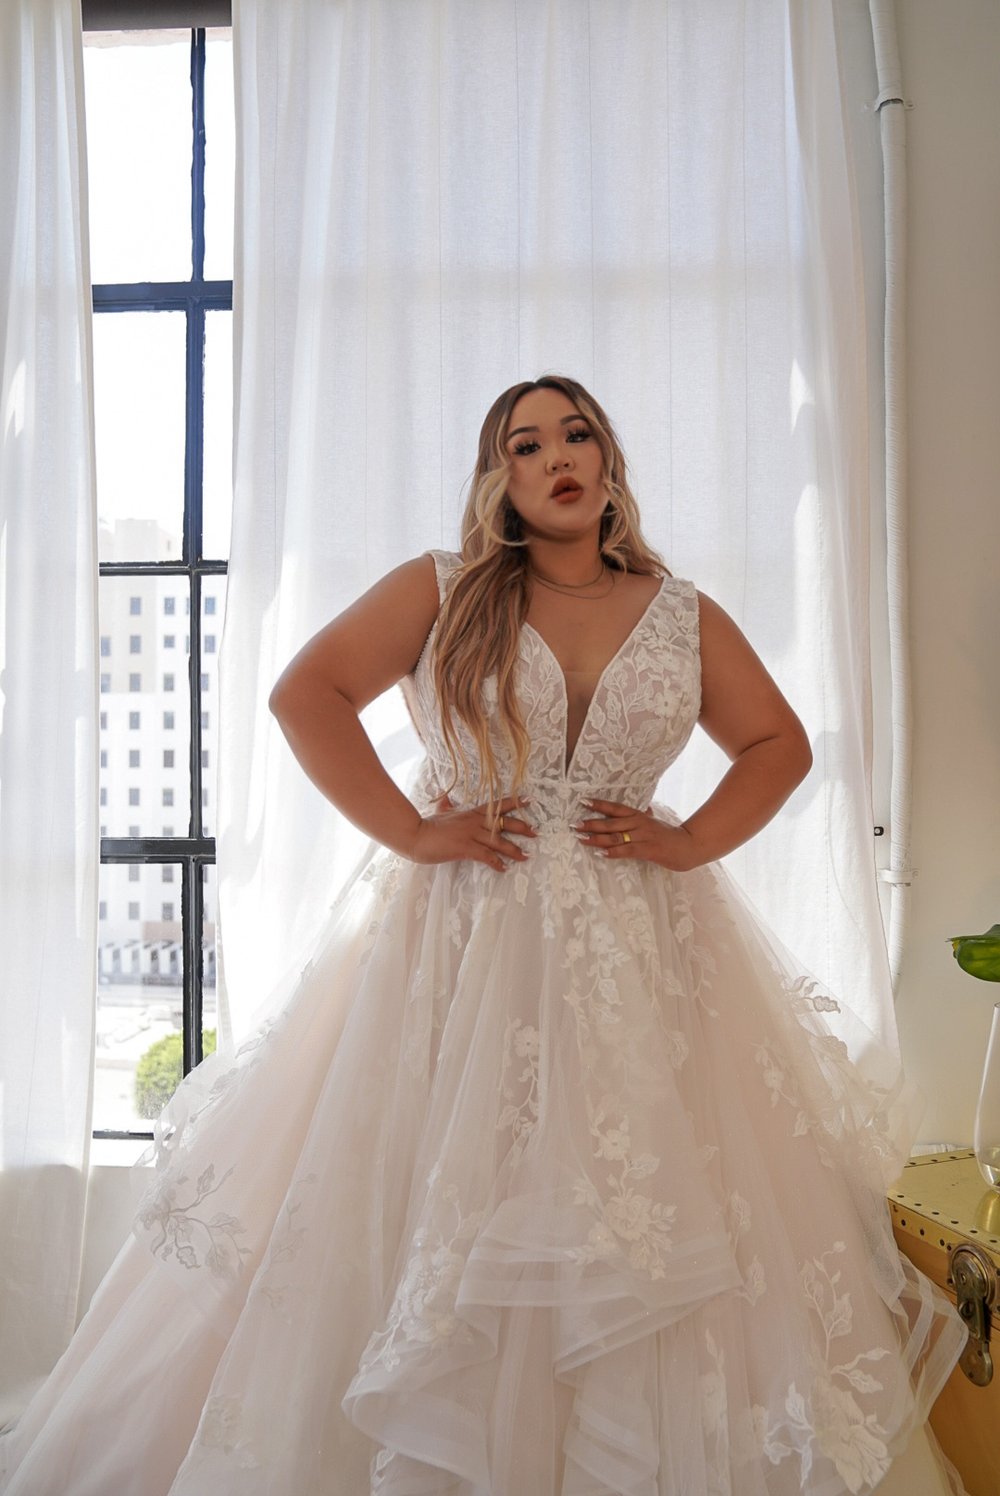 Fantastiske mest Army Plus Size Wedding Dresses — Bride To Be Couture